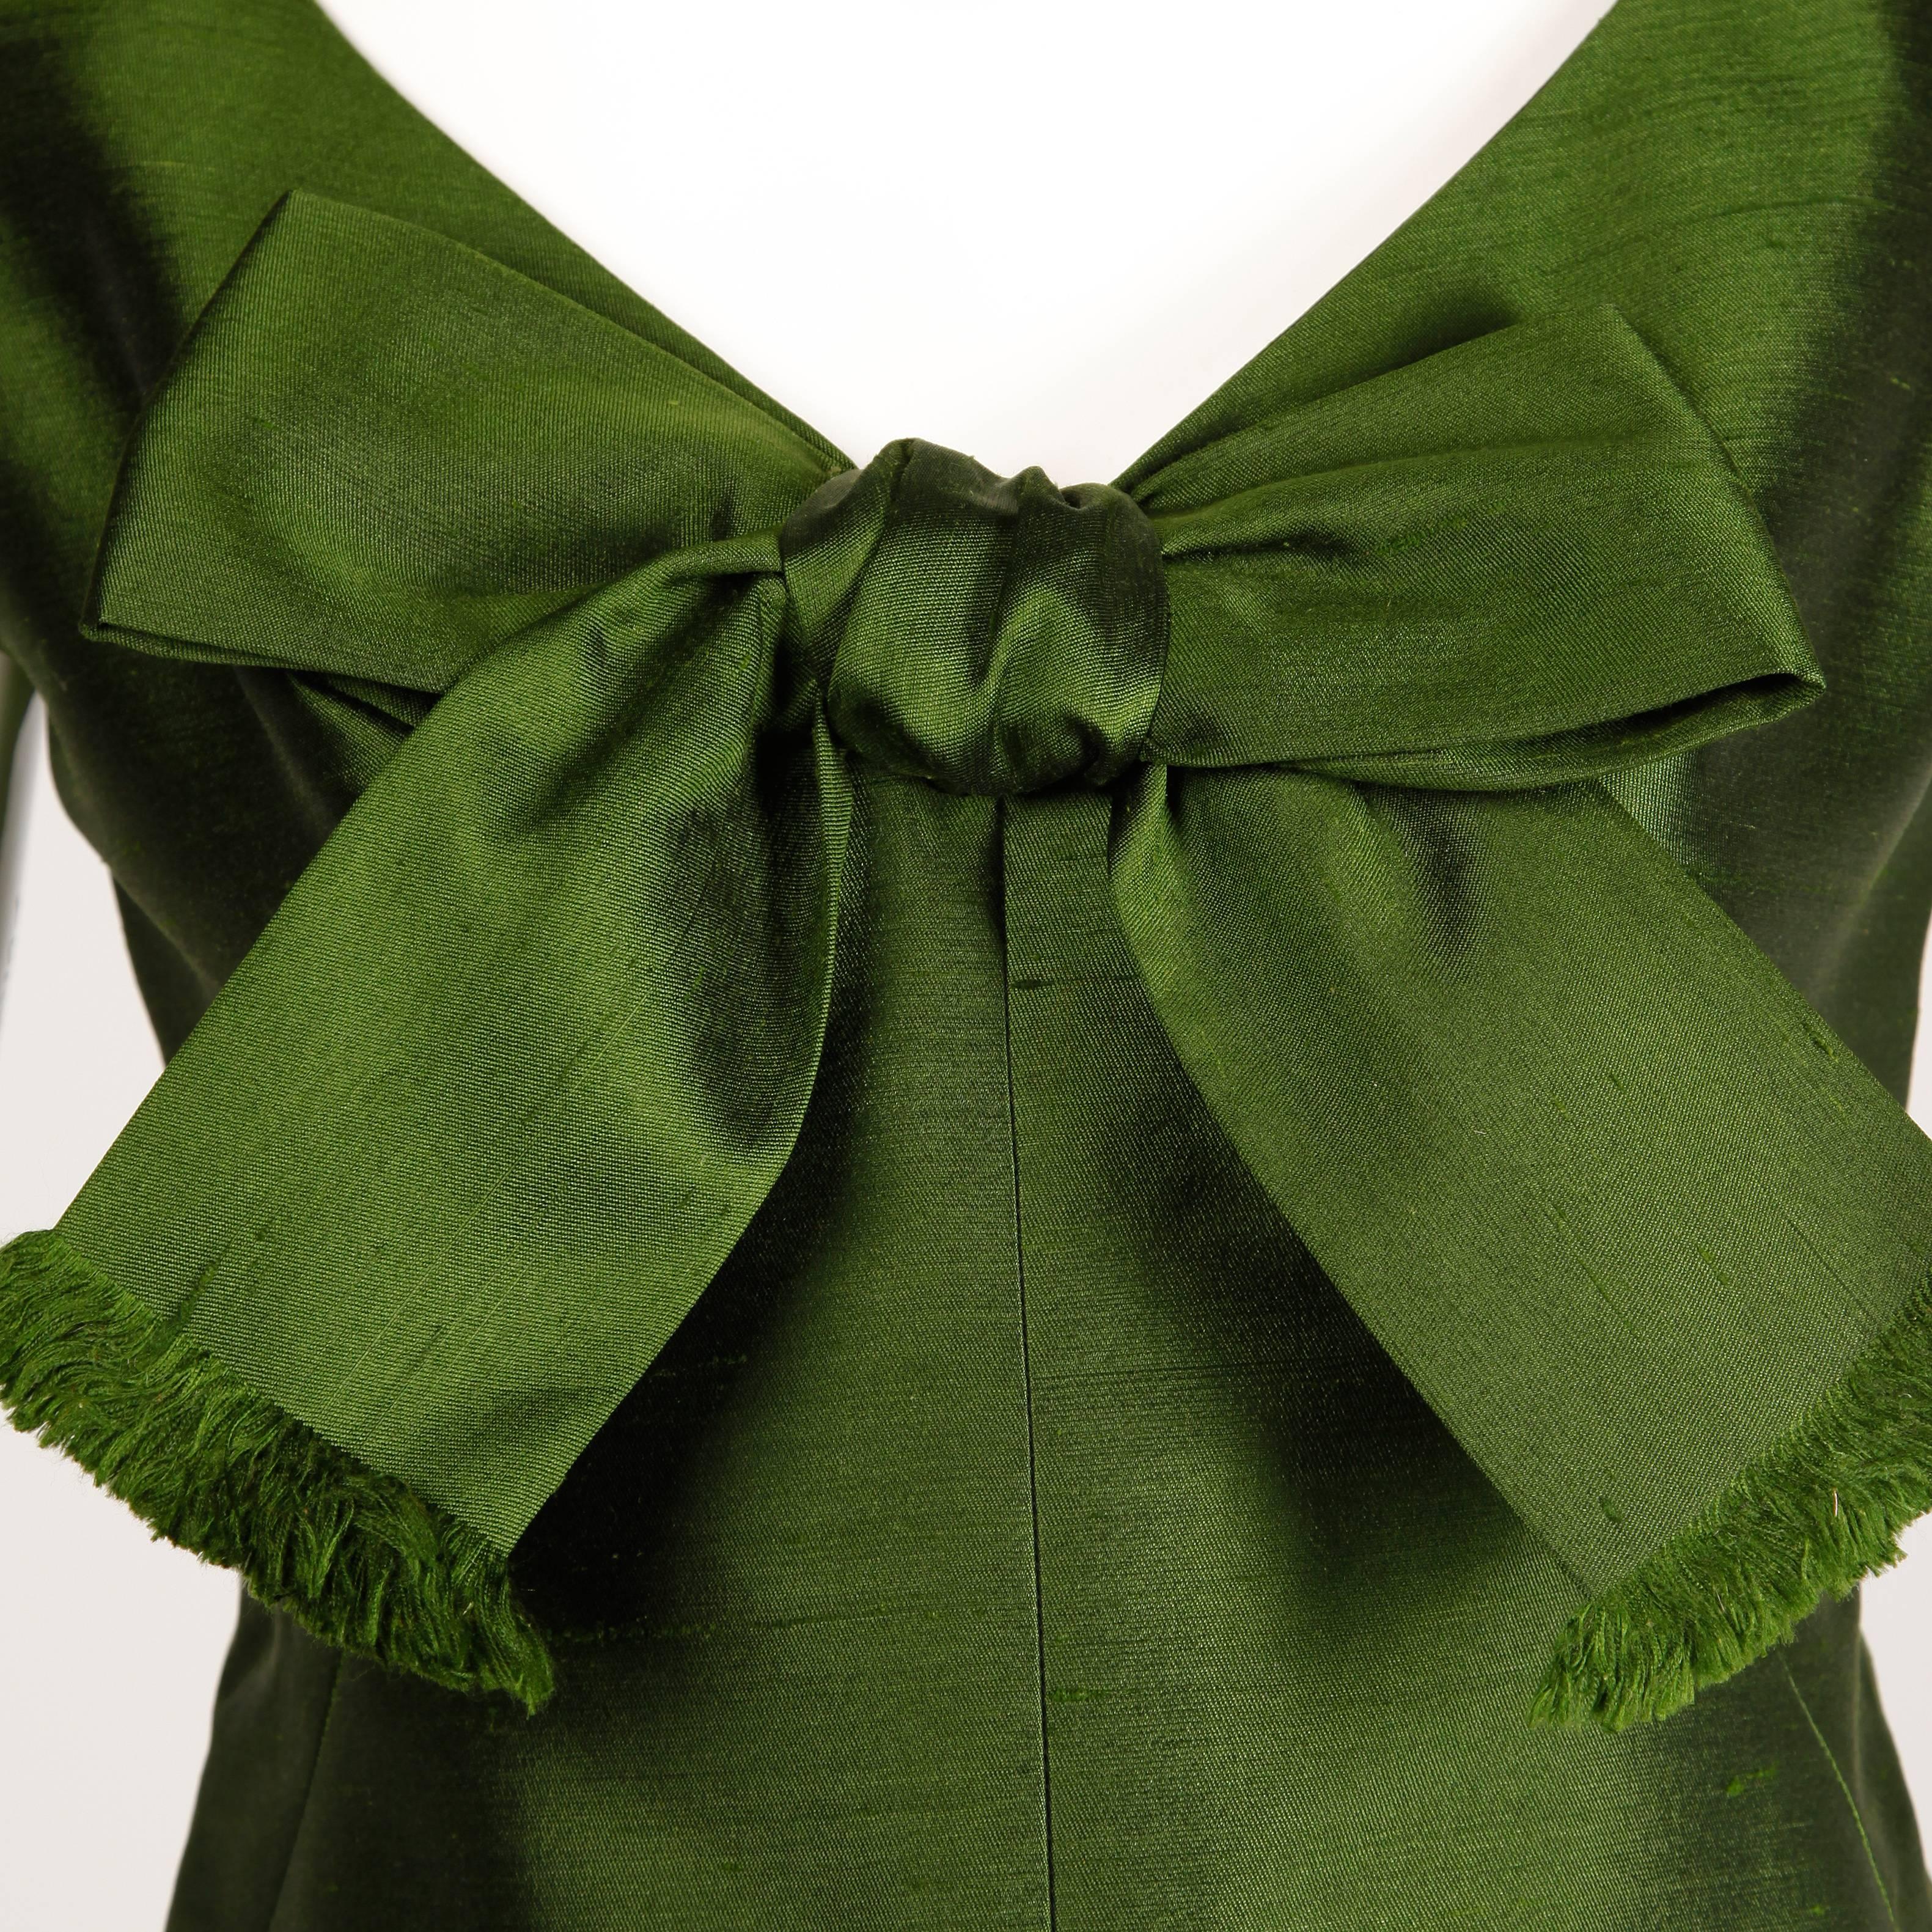 Beautiful olive green silk shantung maxi dress from the 1960s by Nan Duskin.

Details: 

Unlined
Back Metal Zip with Hook Closure
Estimated Size: Medium
Color: Olive Green
Fabric: Silk 
Label: Nan Duskin

Measurement: 

Bust: